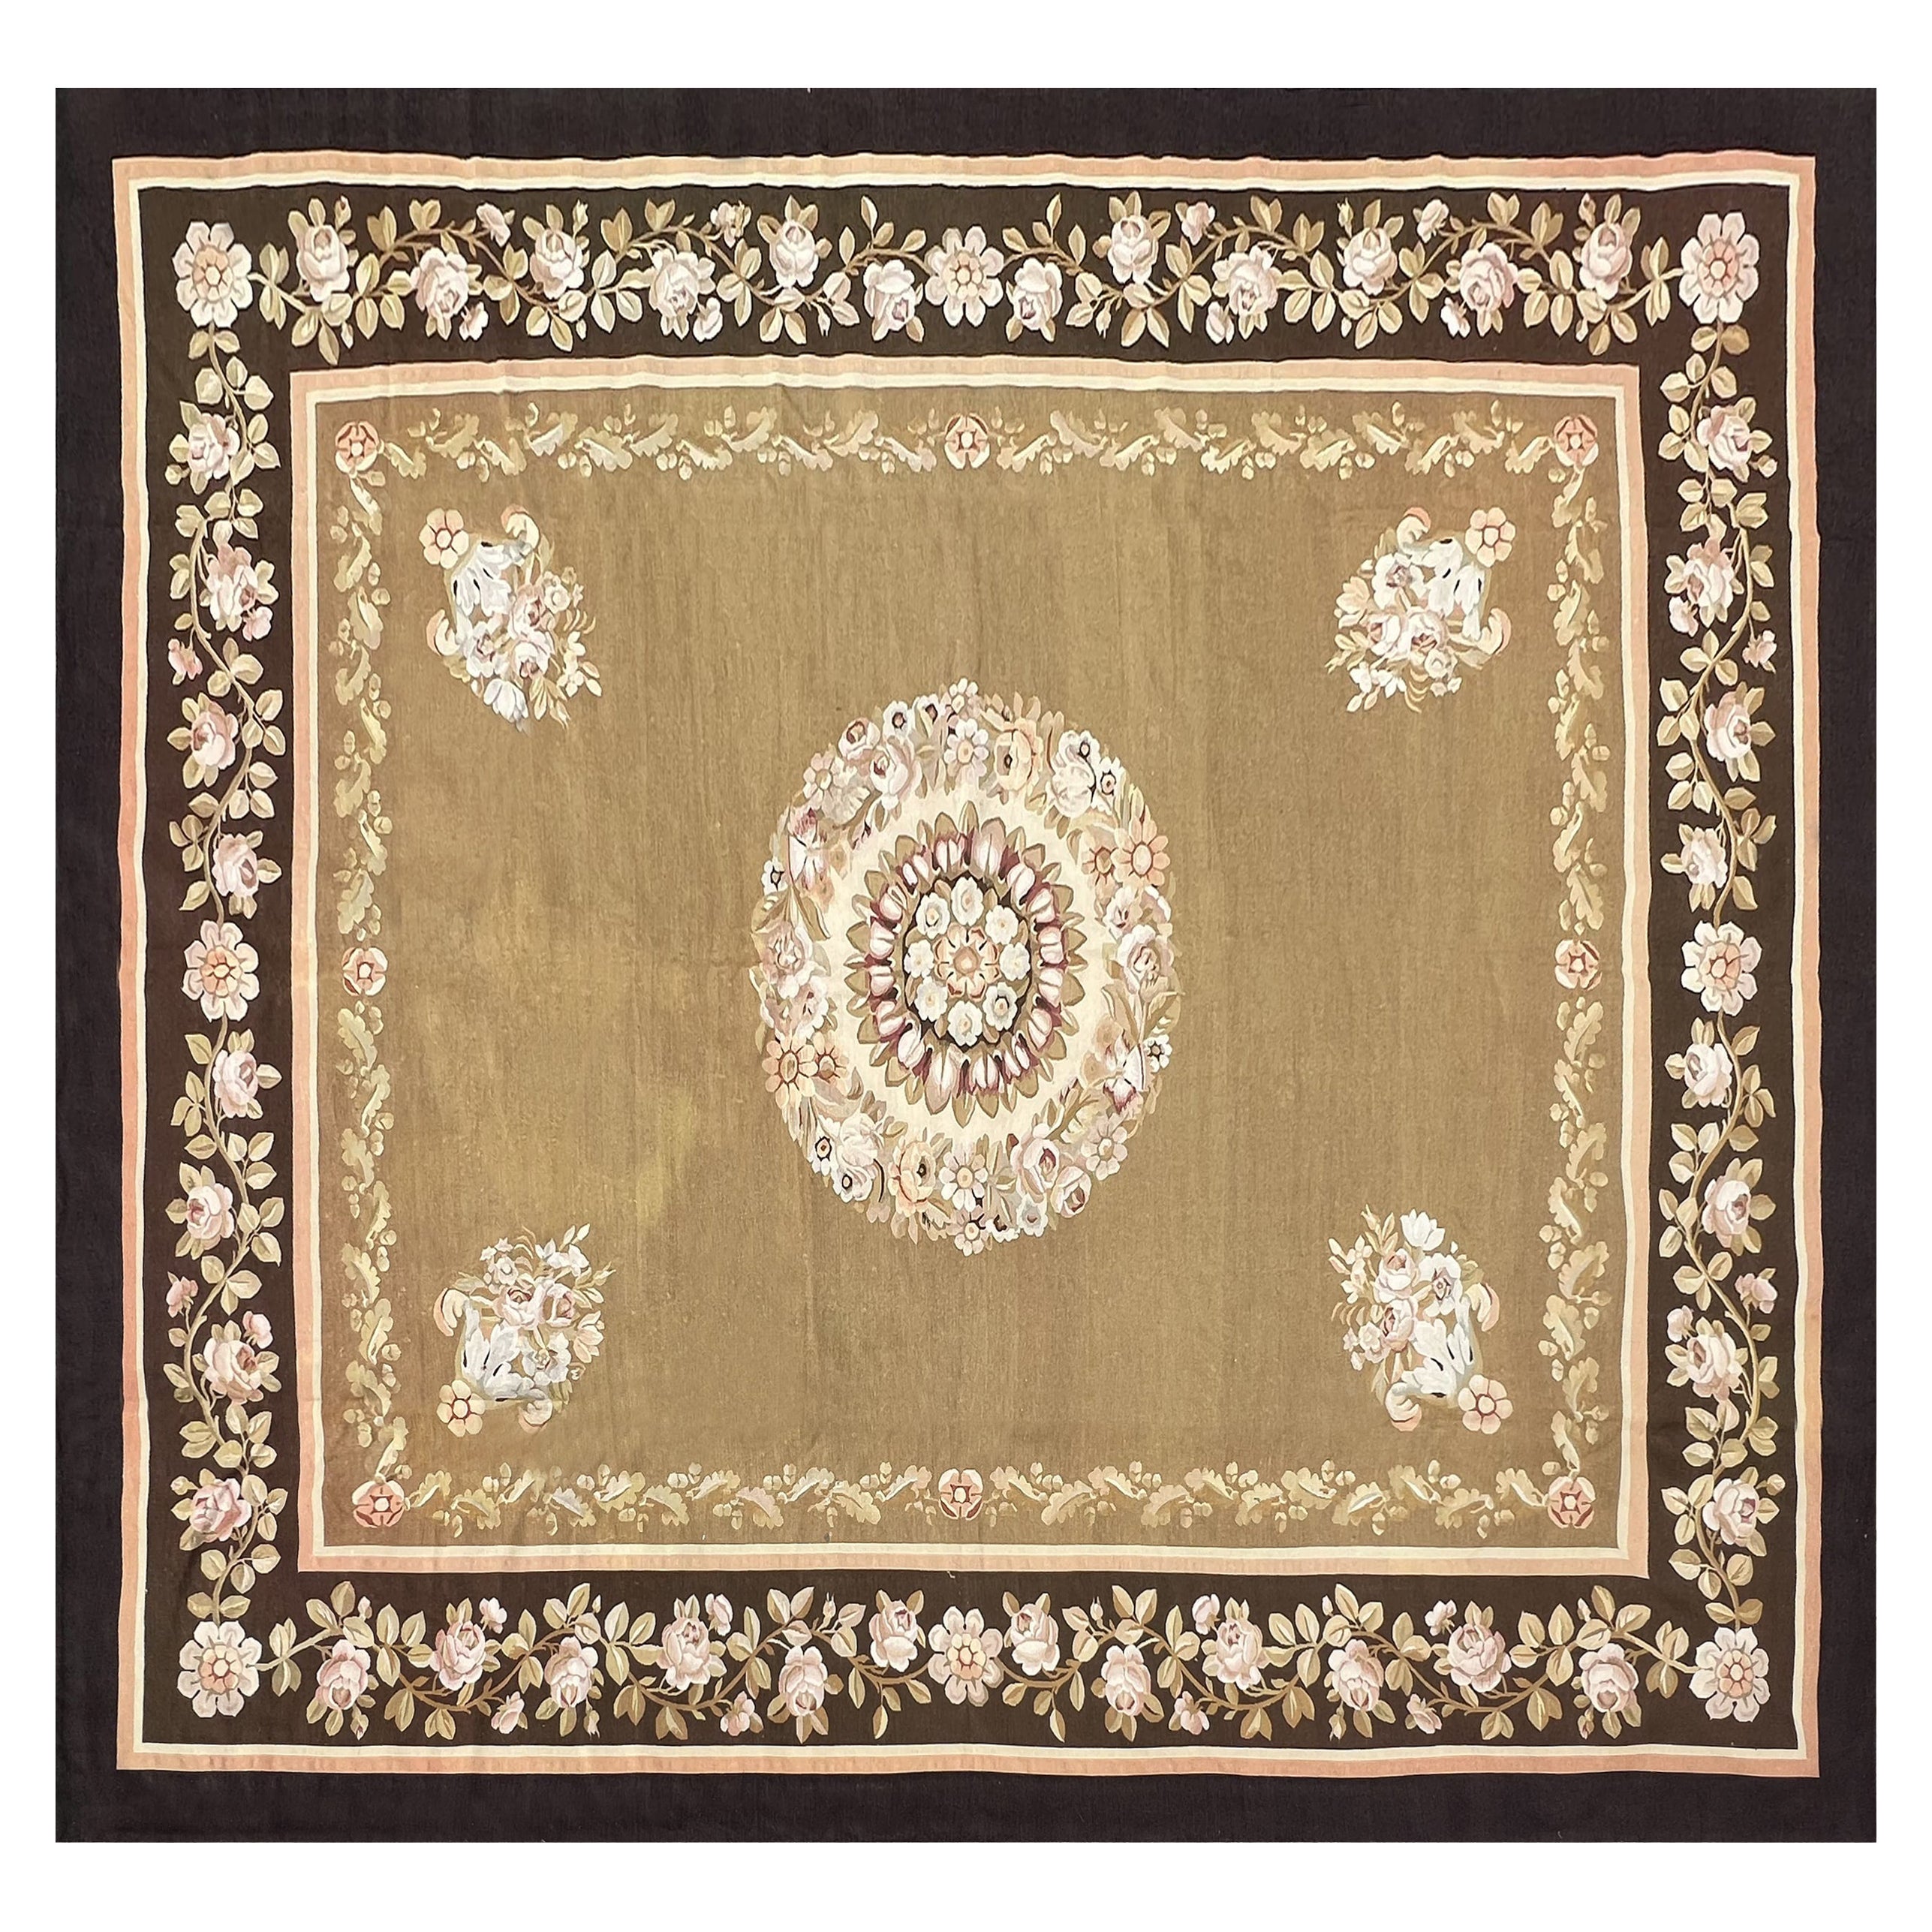 Large Aubusson Manufacture Rug - Empire Style - 4m10x3m38 - N° 1395 For Sale